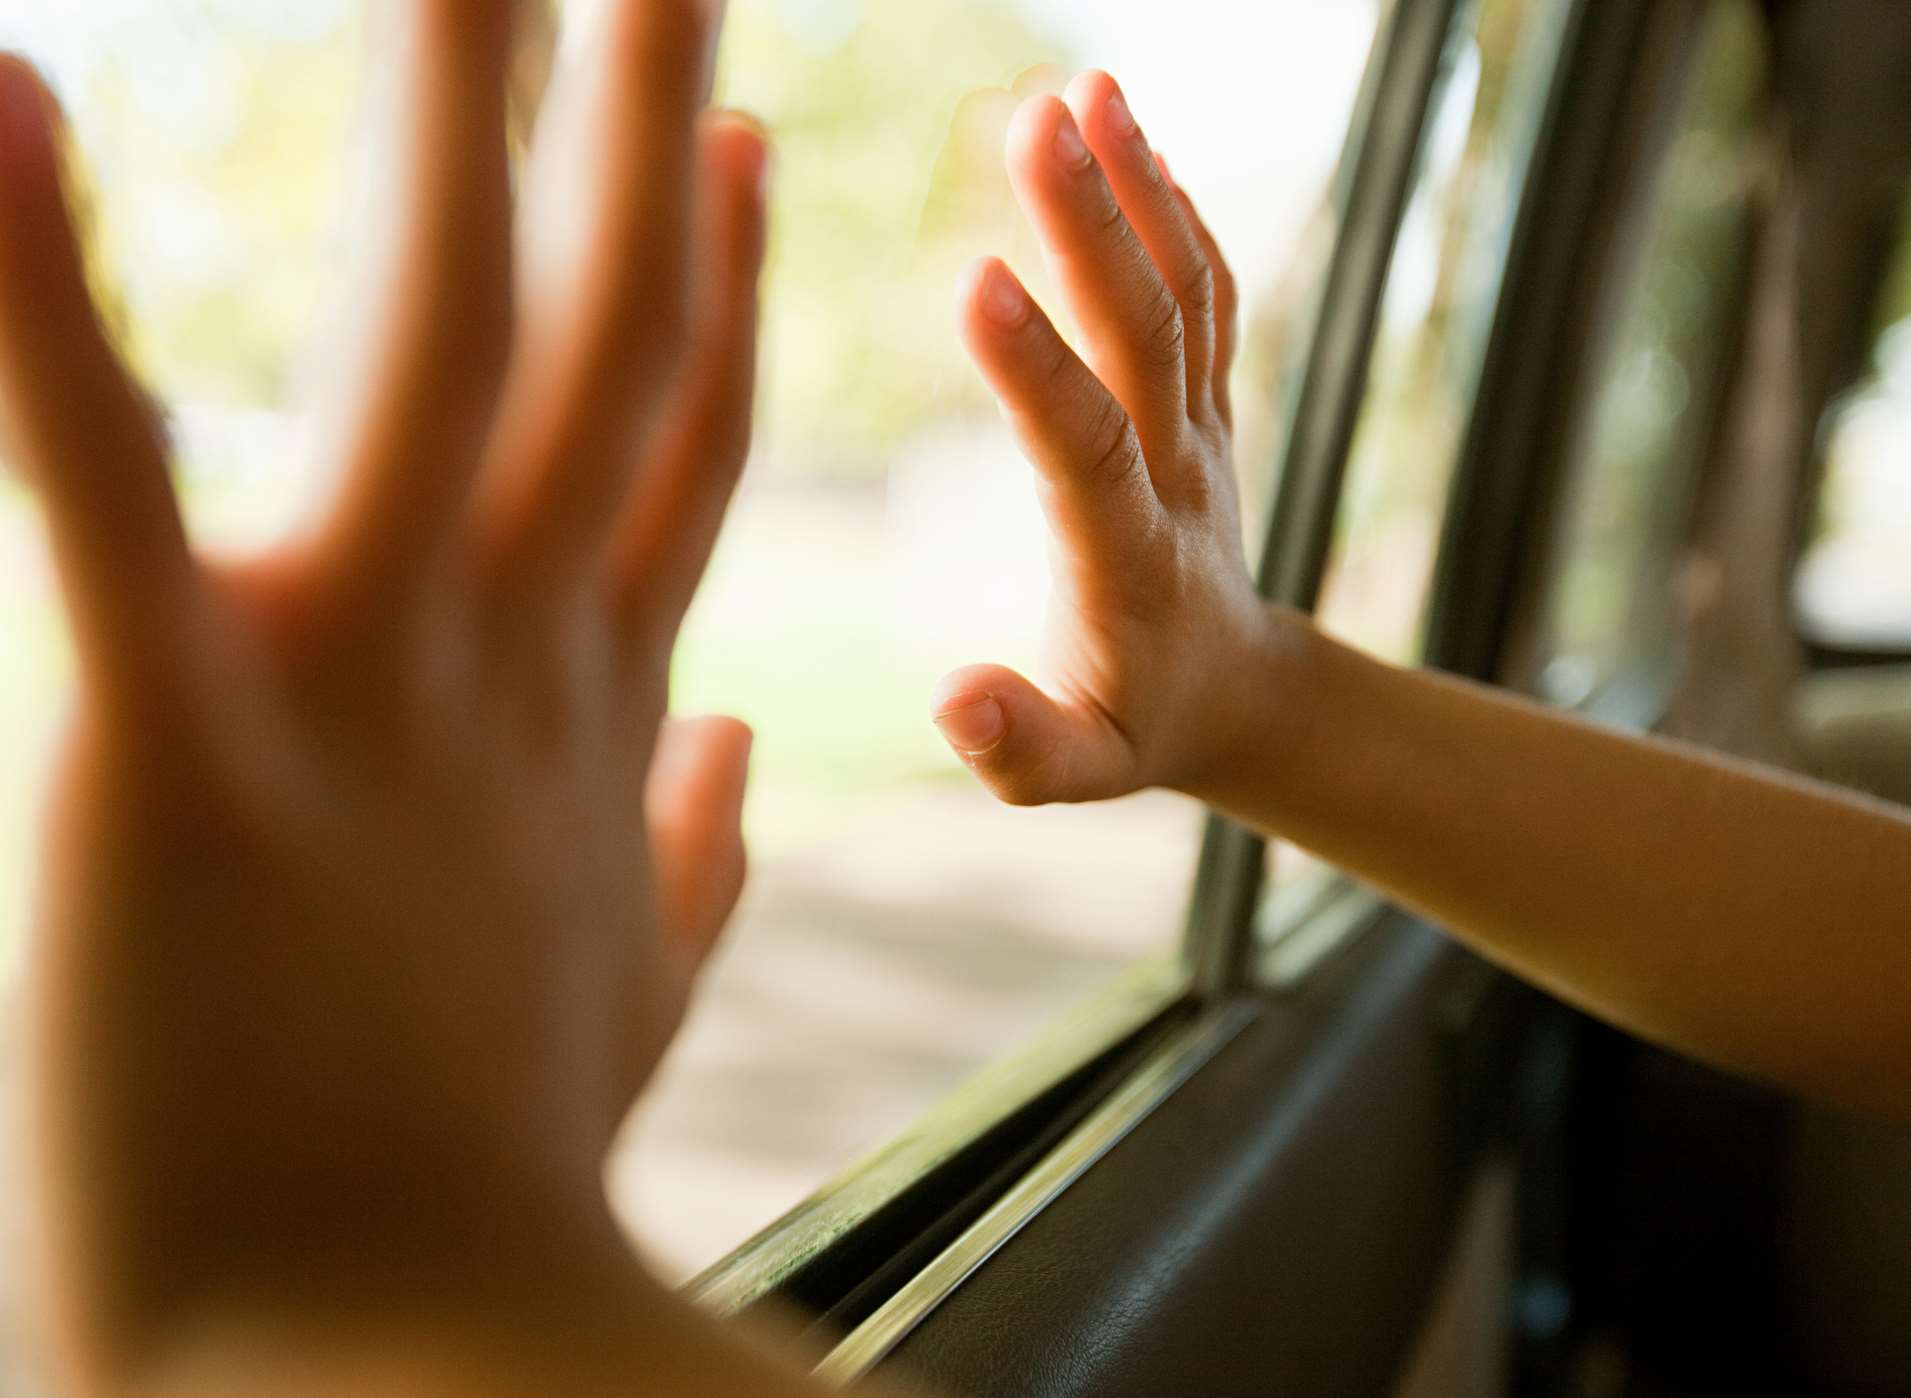 A woman claims she saw children unattended in a car. Stock image.